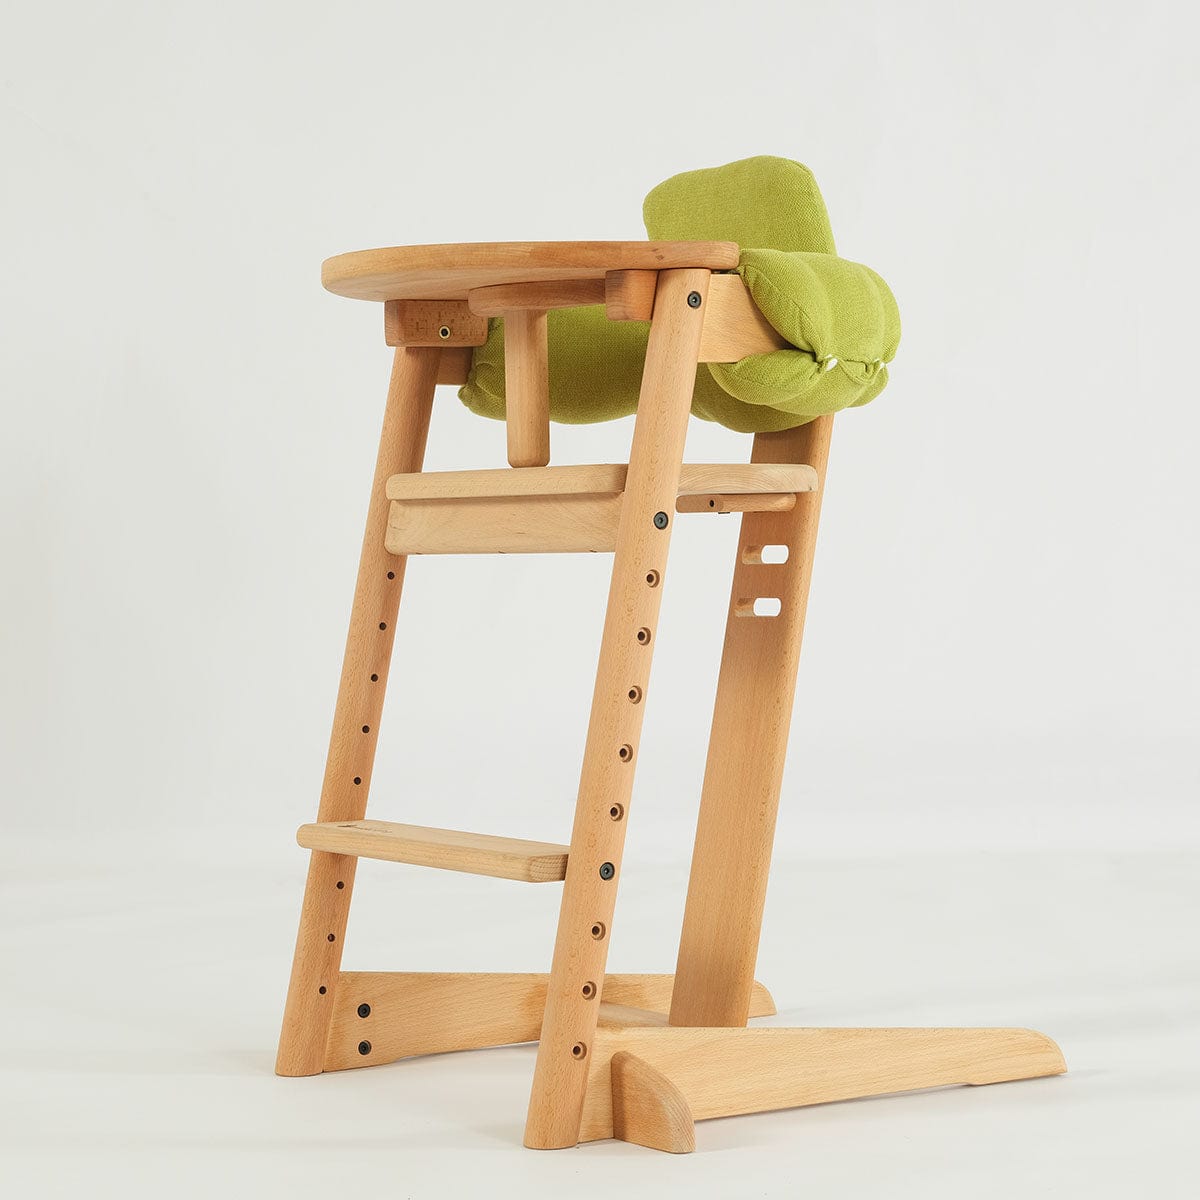 My Duckling MIA Wooden Adjustable Toddler Dining Chair with Cushion and Tray